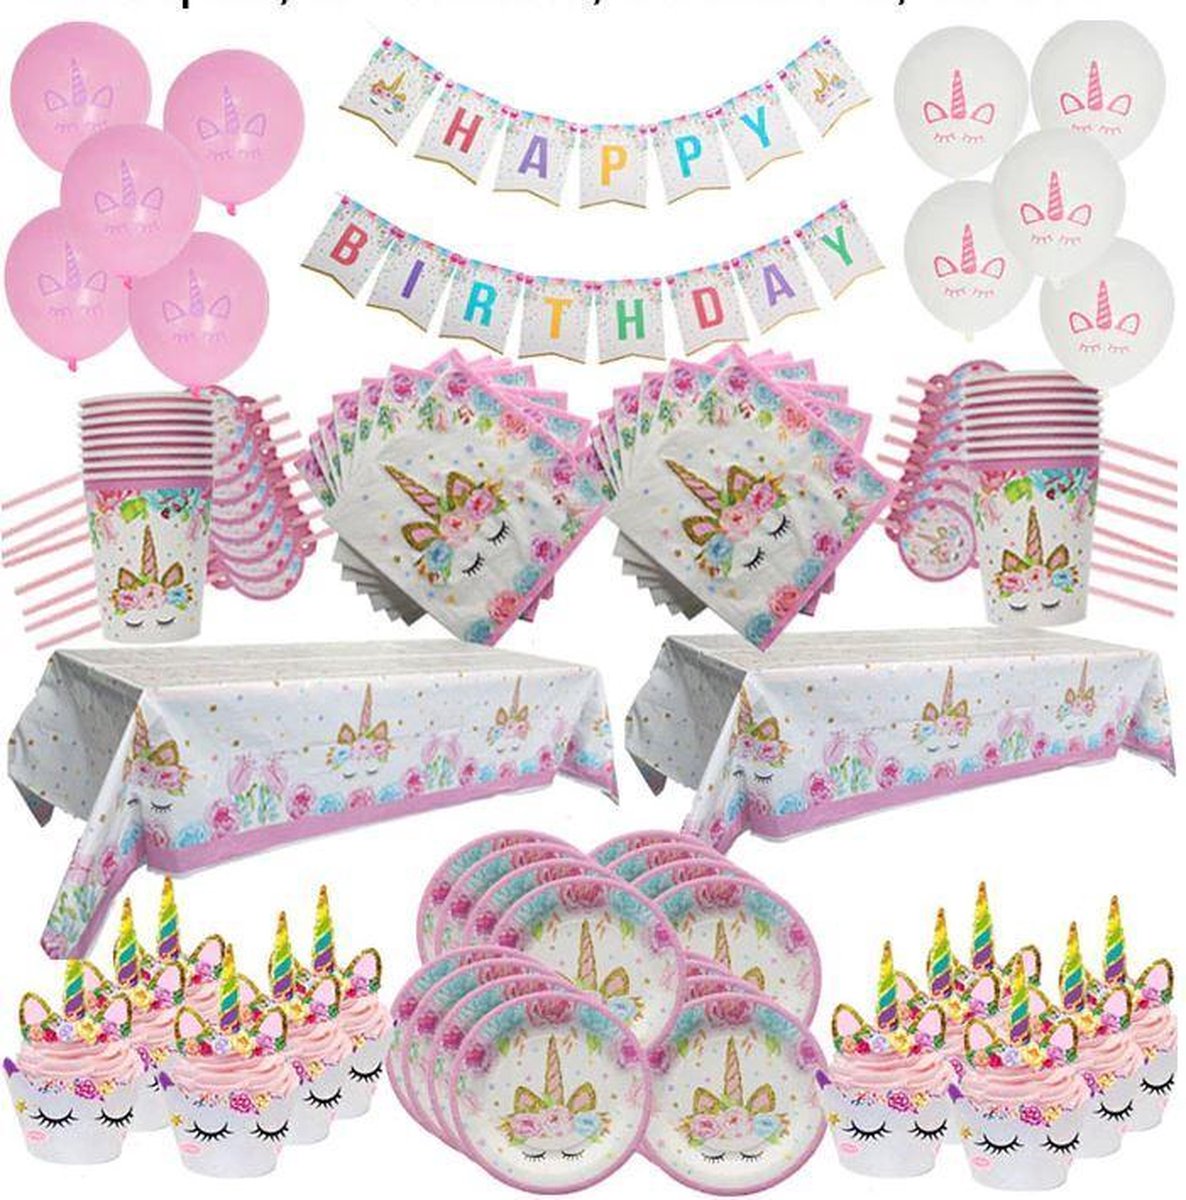 Licorne Party en 3 étapes - Holly Party